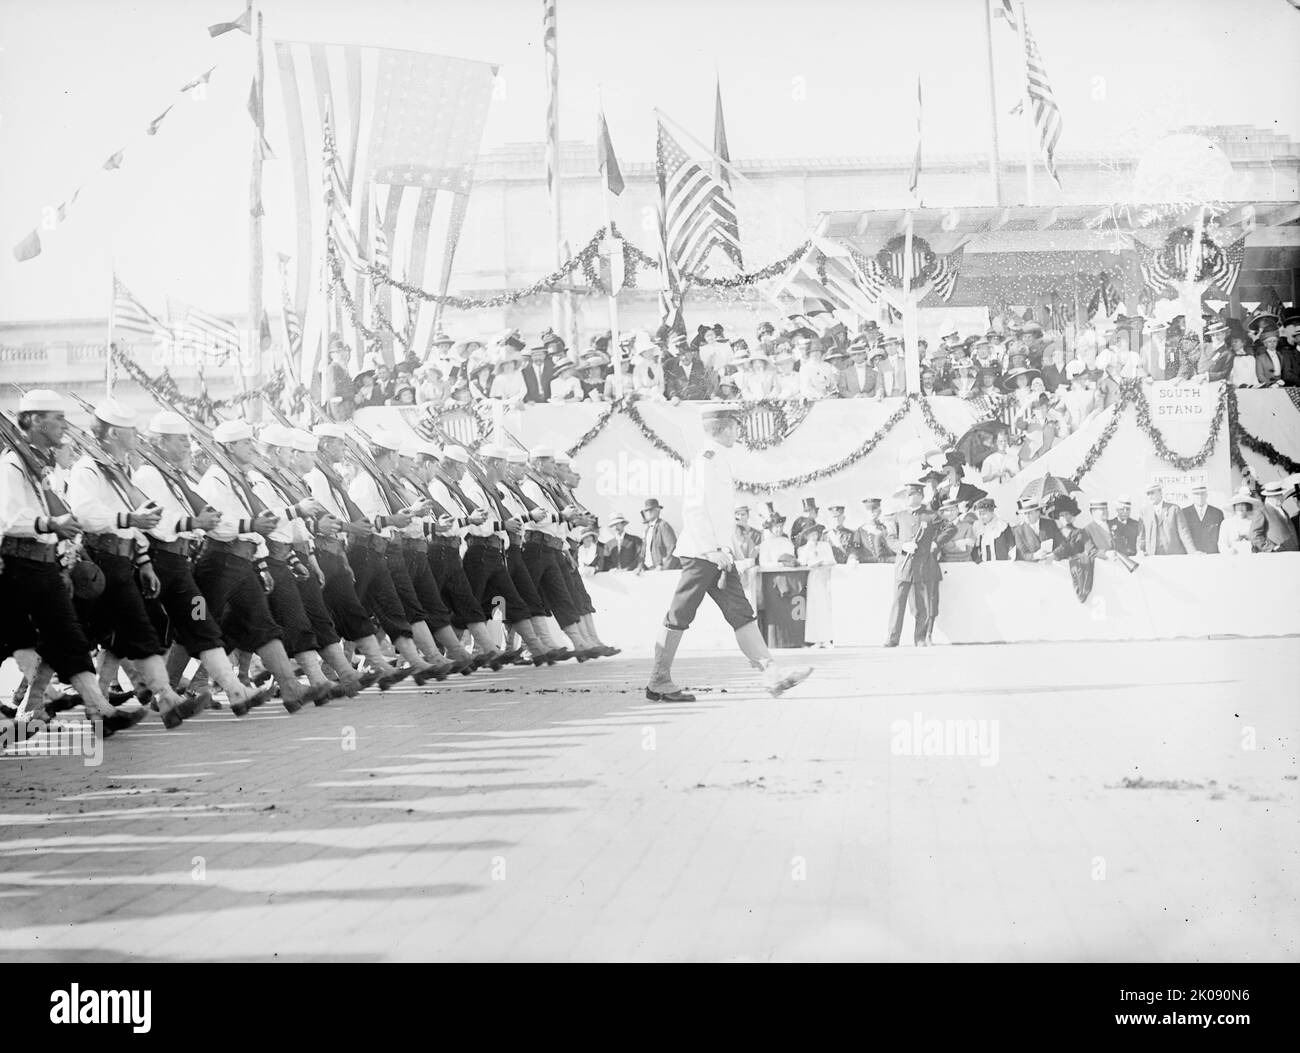 Columbus Memorial. Parade At Unveiling, 1912. [The Columbus Fountain, also known as the Columbus Memorial, was unveiled in Washington, D.C. in 1912. It was designed by Lorado Taft. Seen here are US Navy sailors marching past a grandstand as part of the celebrations]. Stock Photo